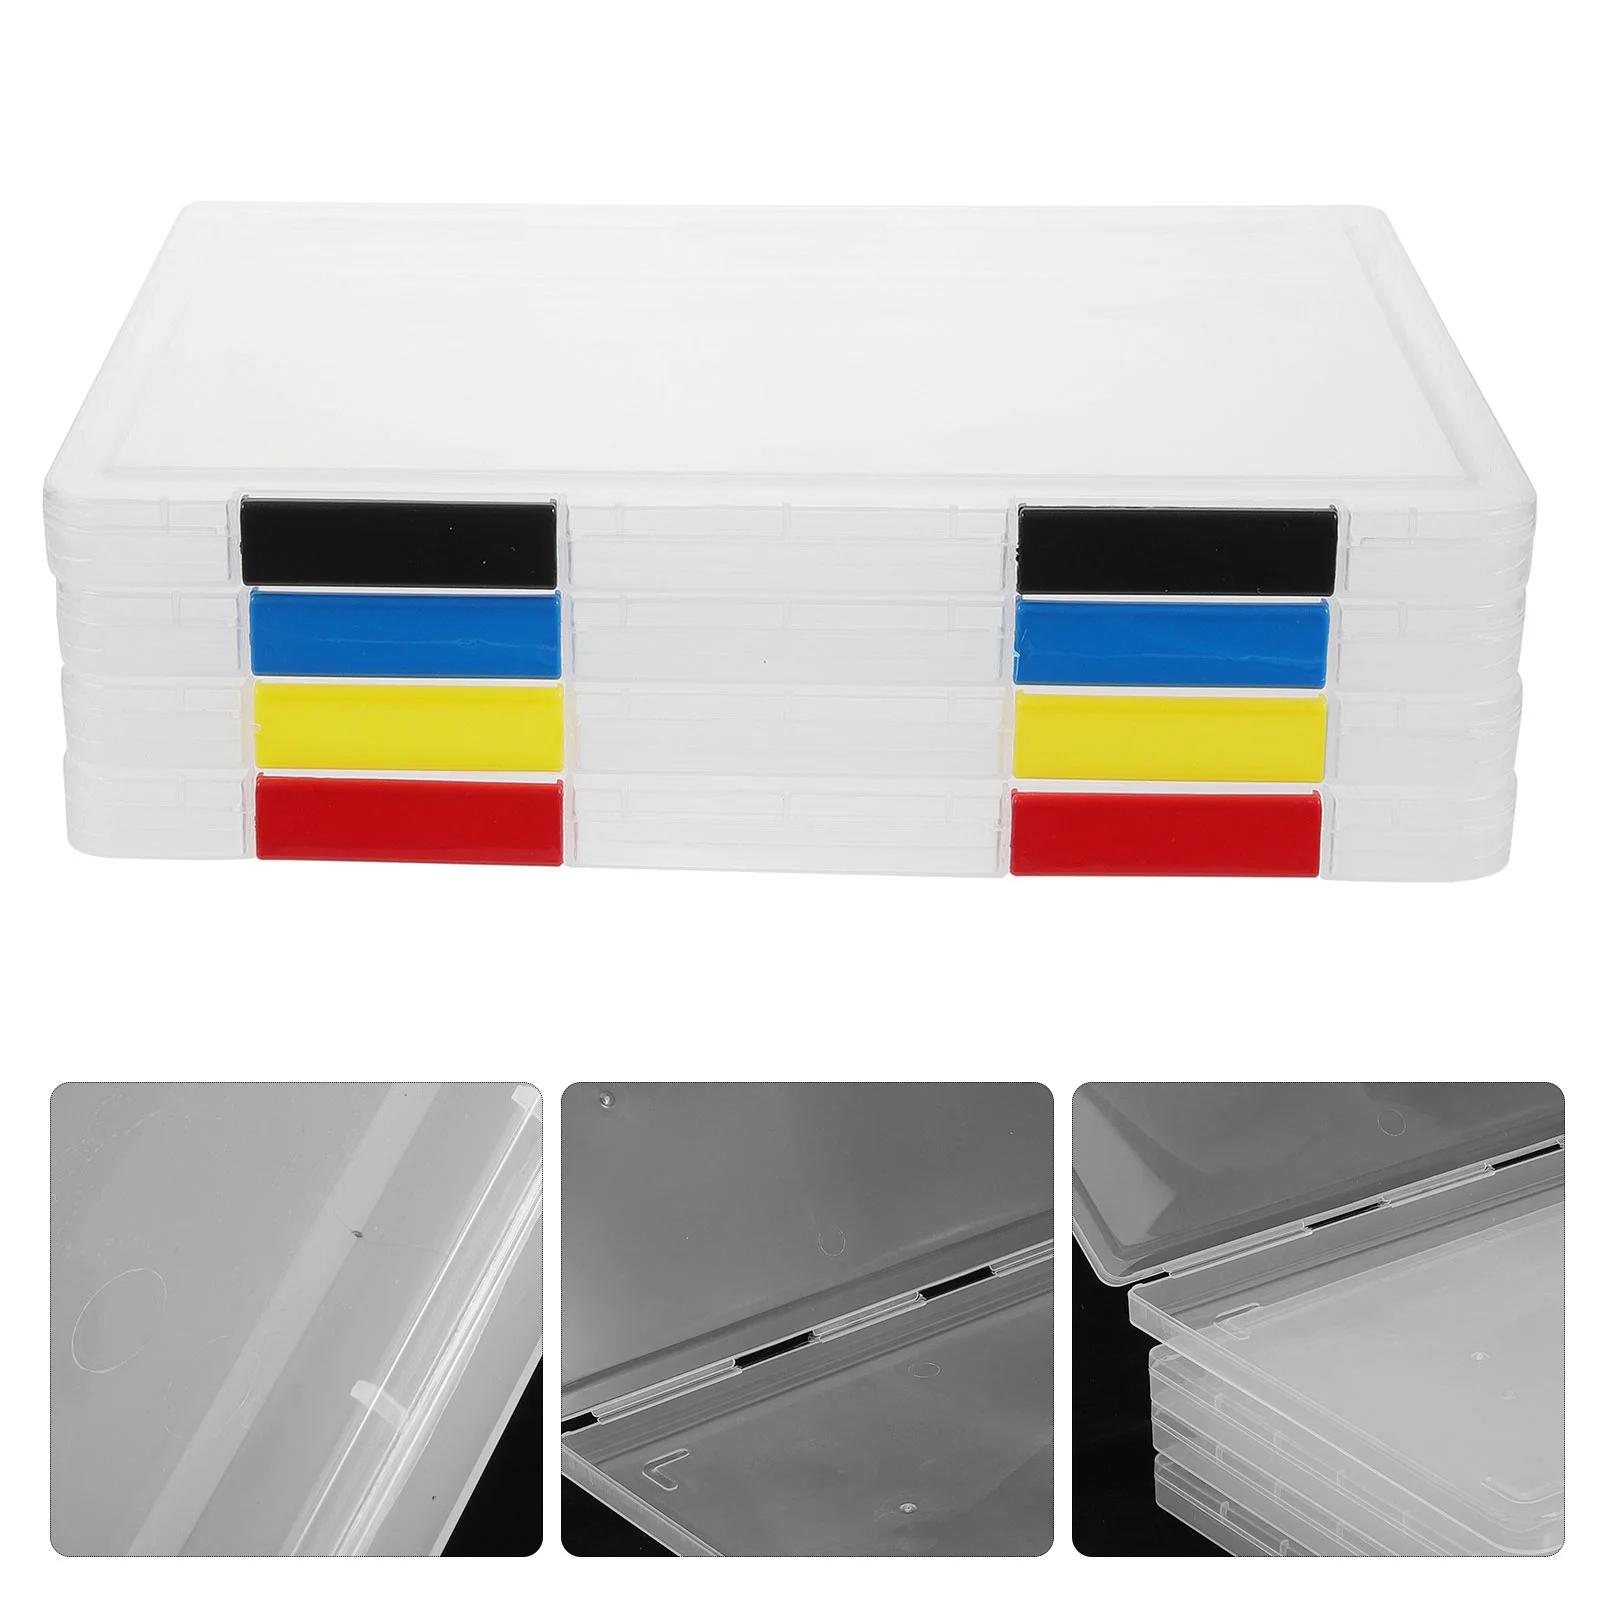 

4 Pcs Magazines Paper Protector File Organizer Plastic Storage Containers Clothes Folder Office Table Top